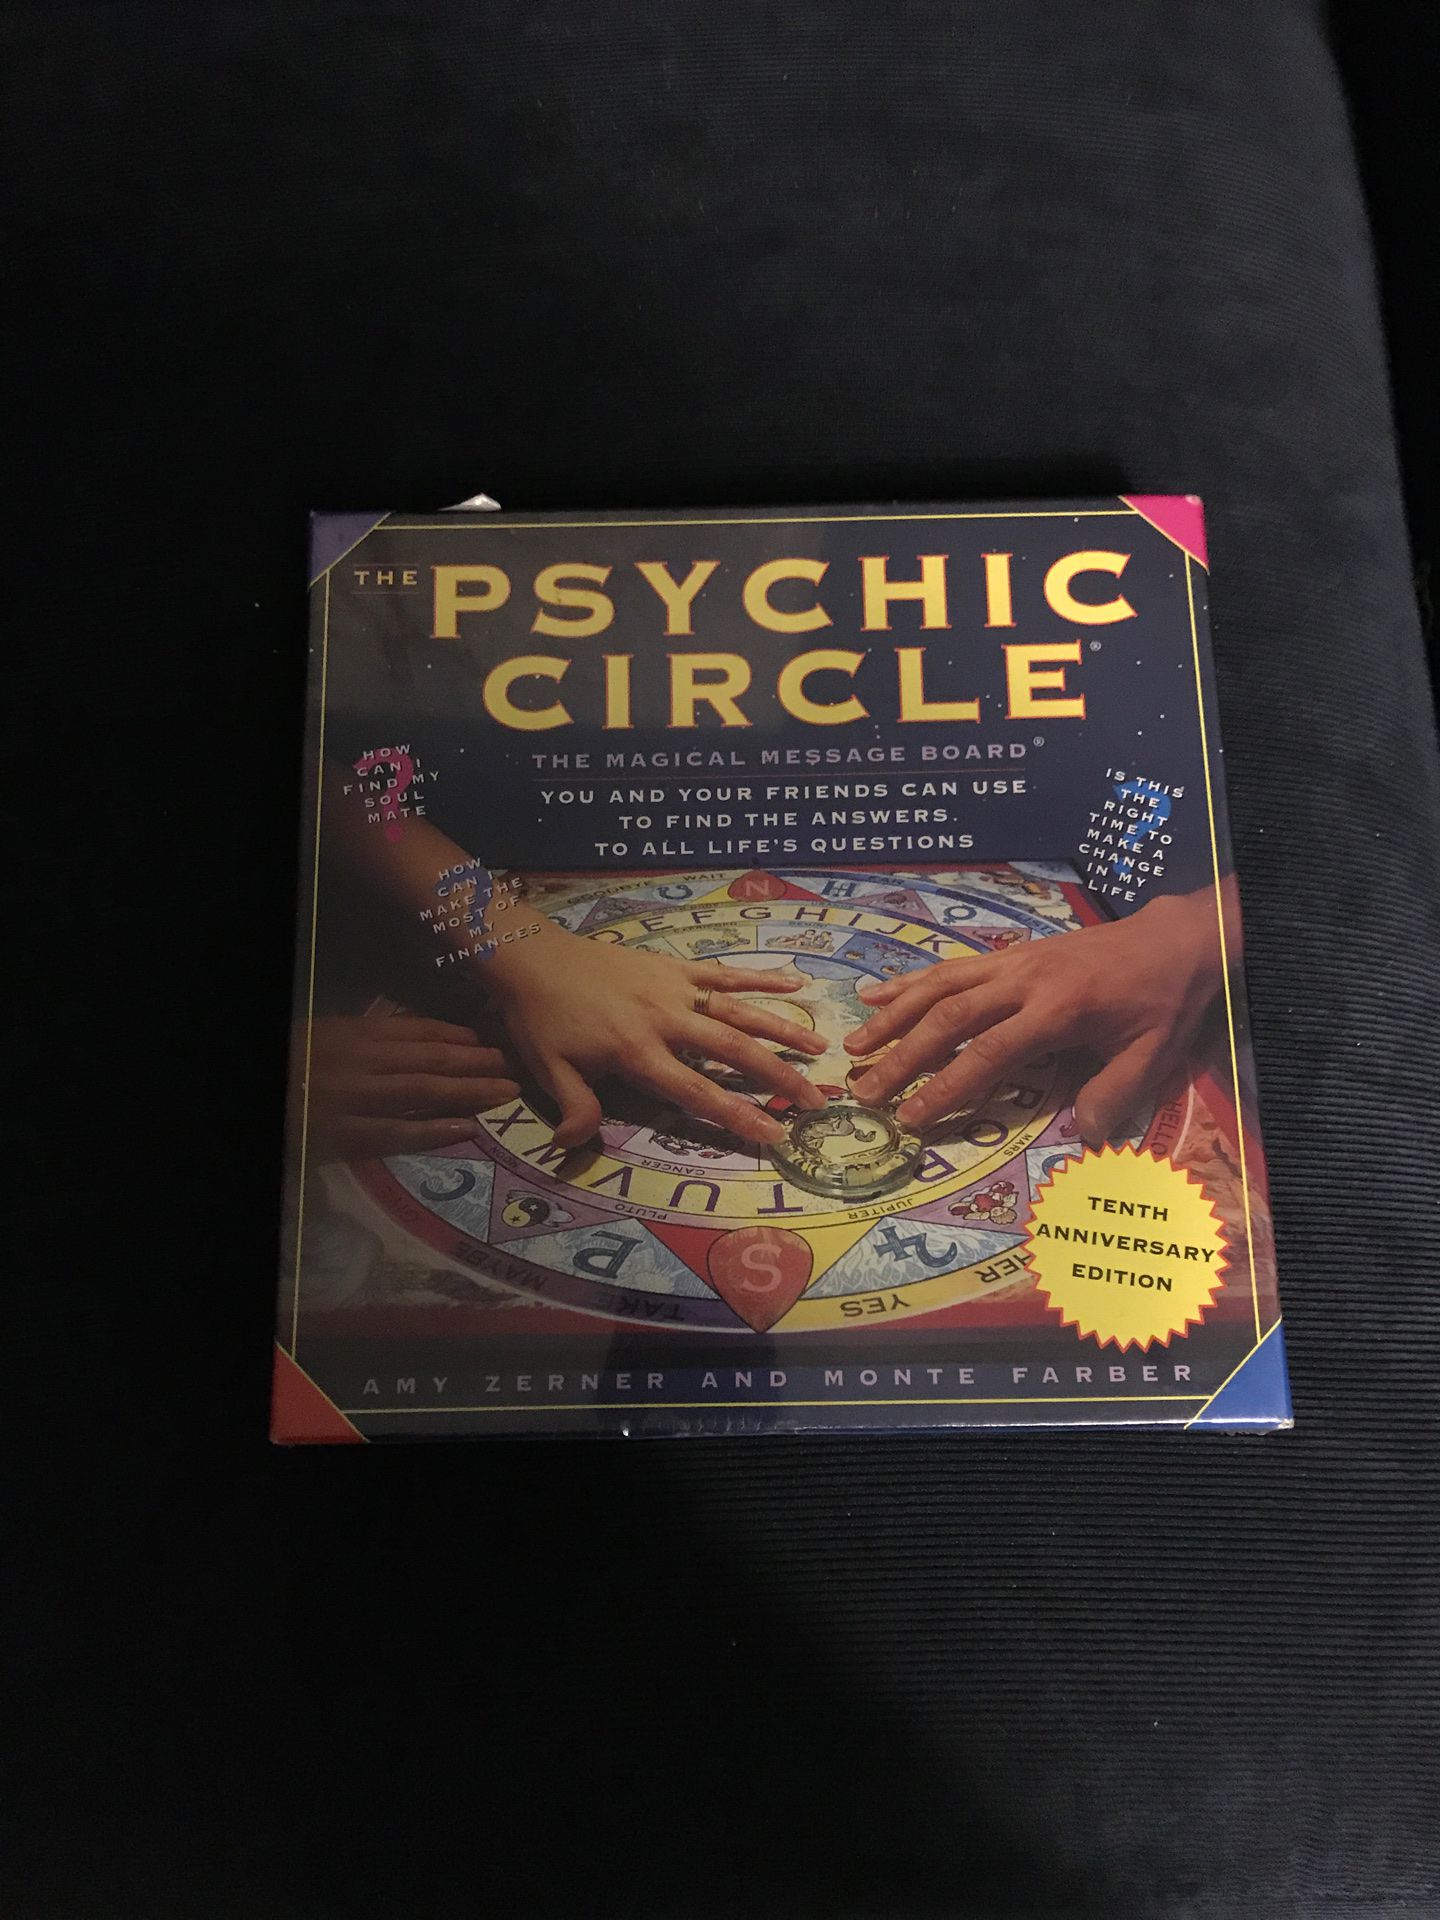 The Psychic Circle magical board game.